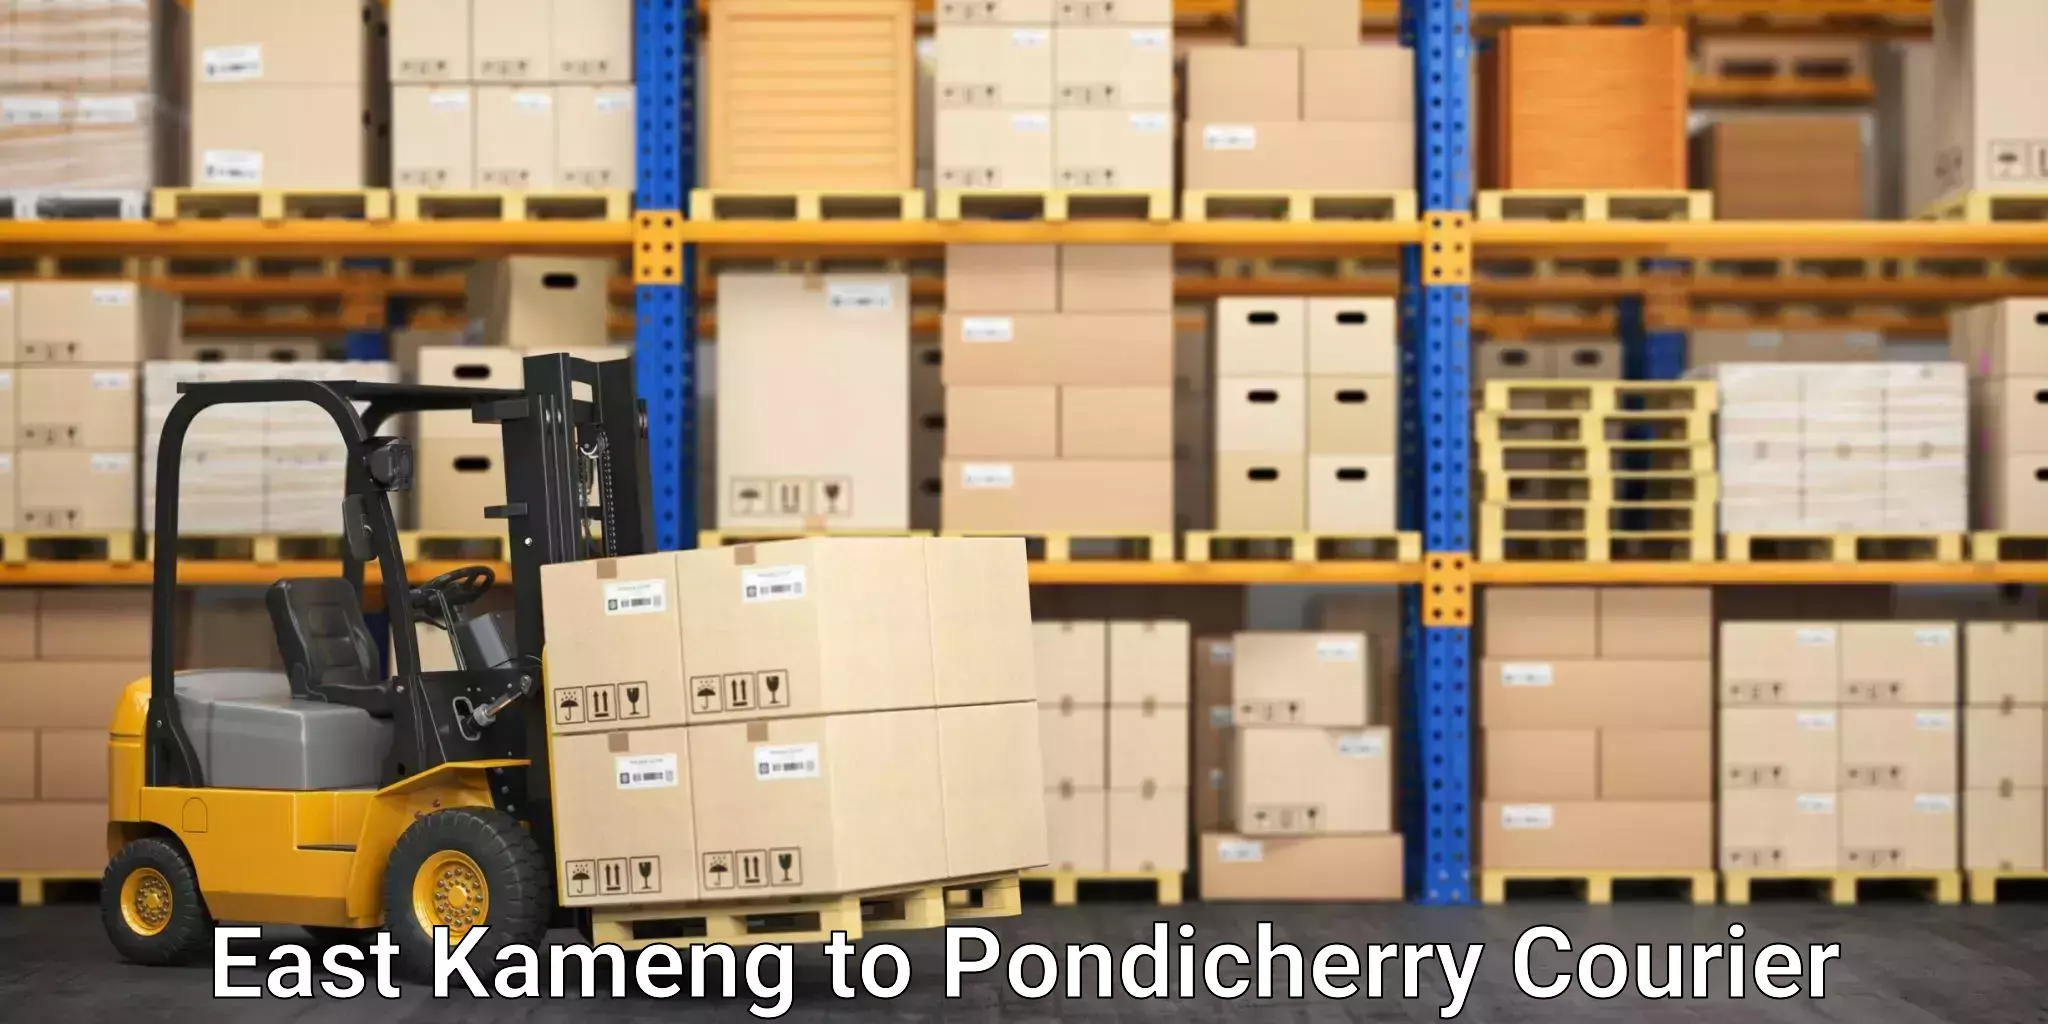 Express shipping in East Kameng to Pondicherry